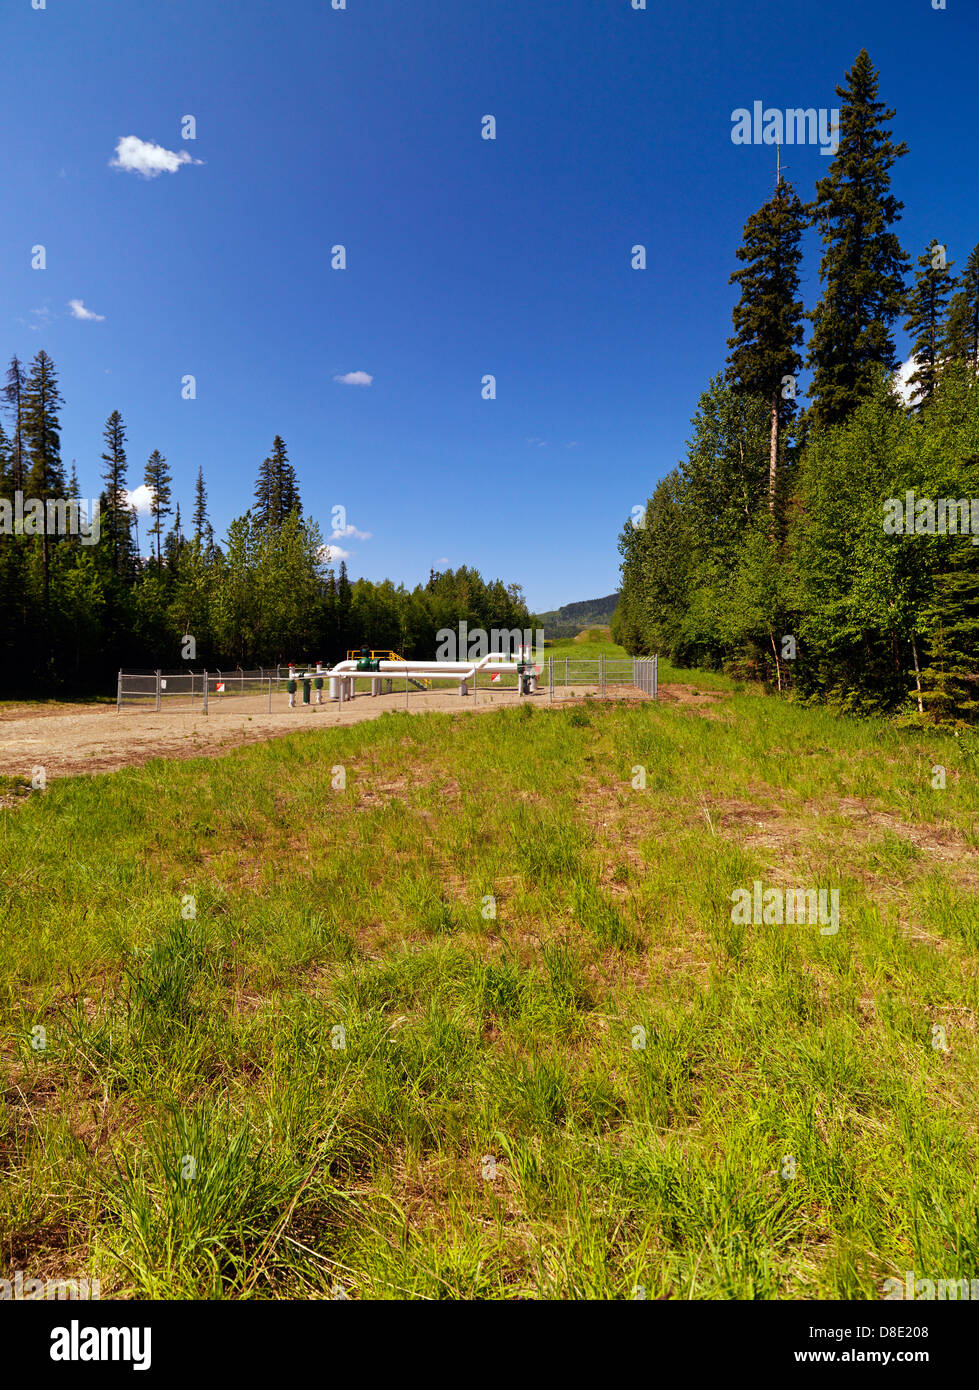 Gas pipeline owned and operated by Spectra Energy Corporation, photographed in British Columbia Canada Stock Photo